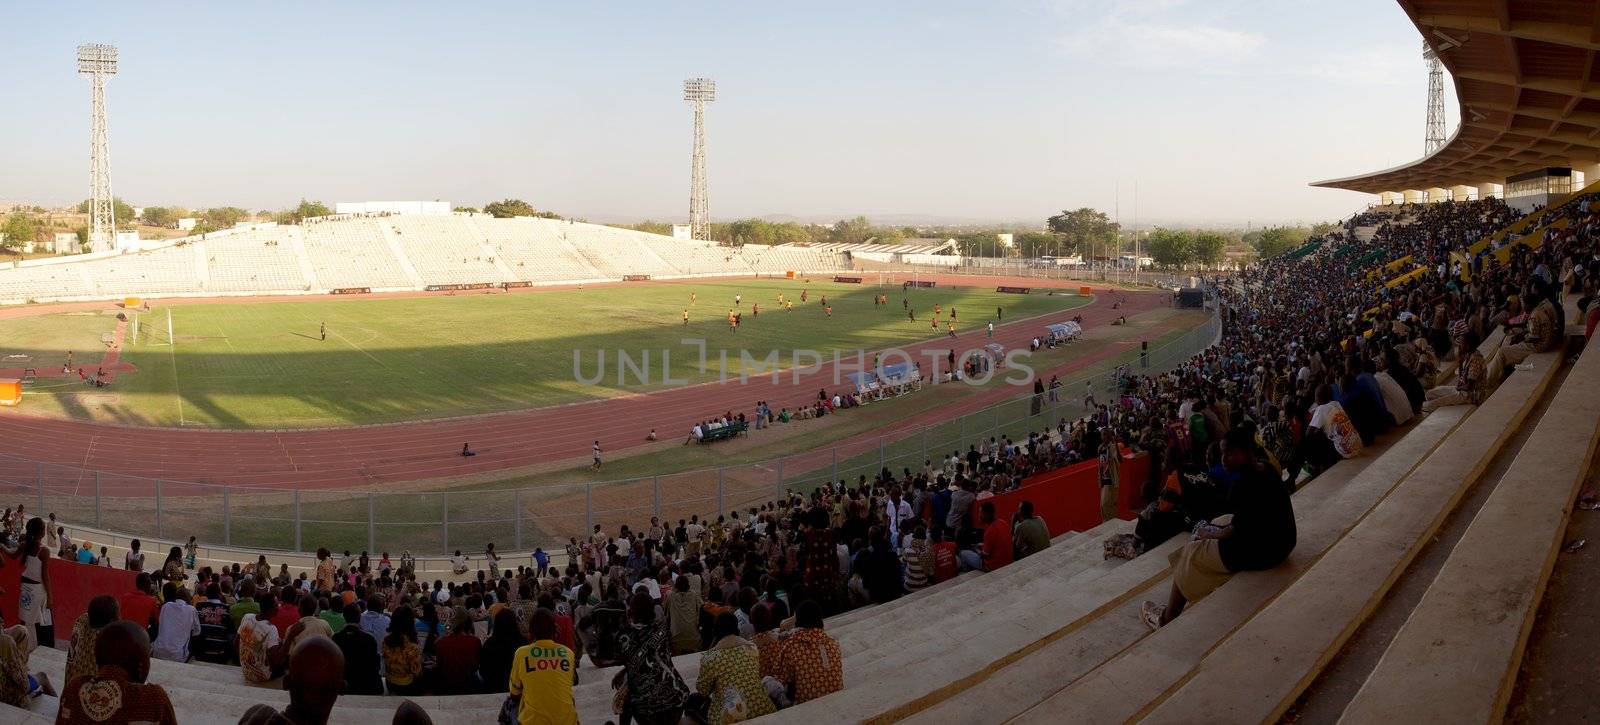 Chlldrens in a stadium in Bamako by watchtheworld